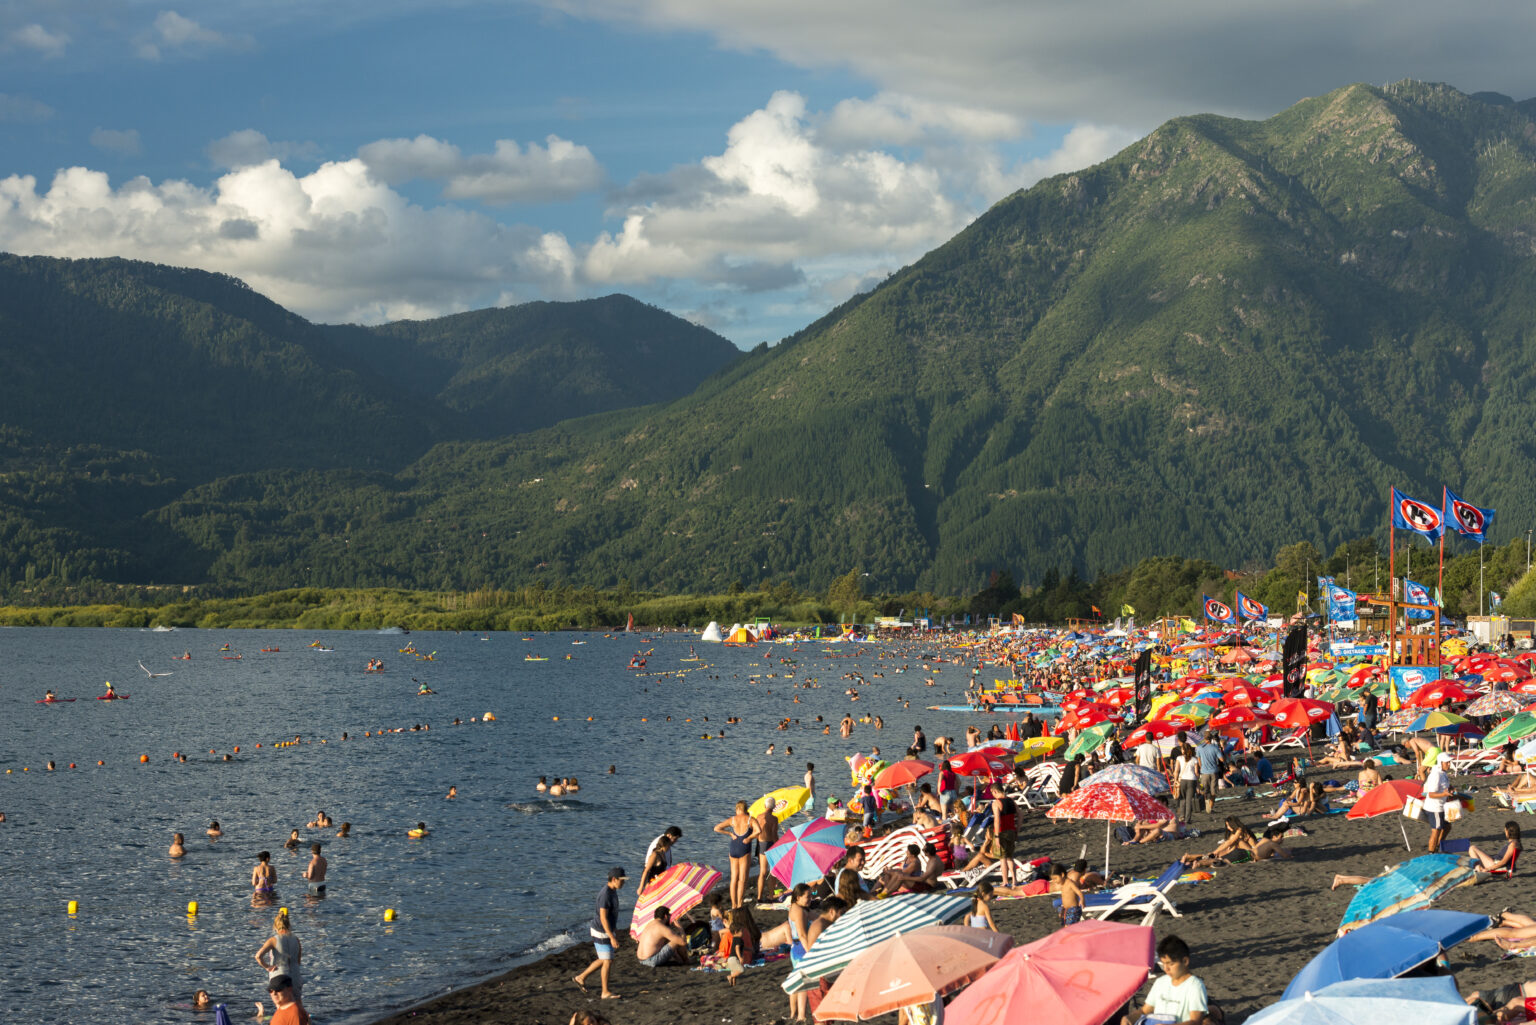 swimmers on the beach of Lake Villarrica with colorful umbrellas in front of a mountain range